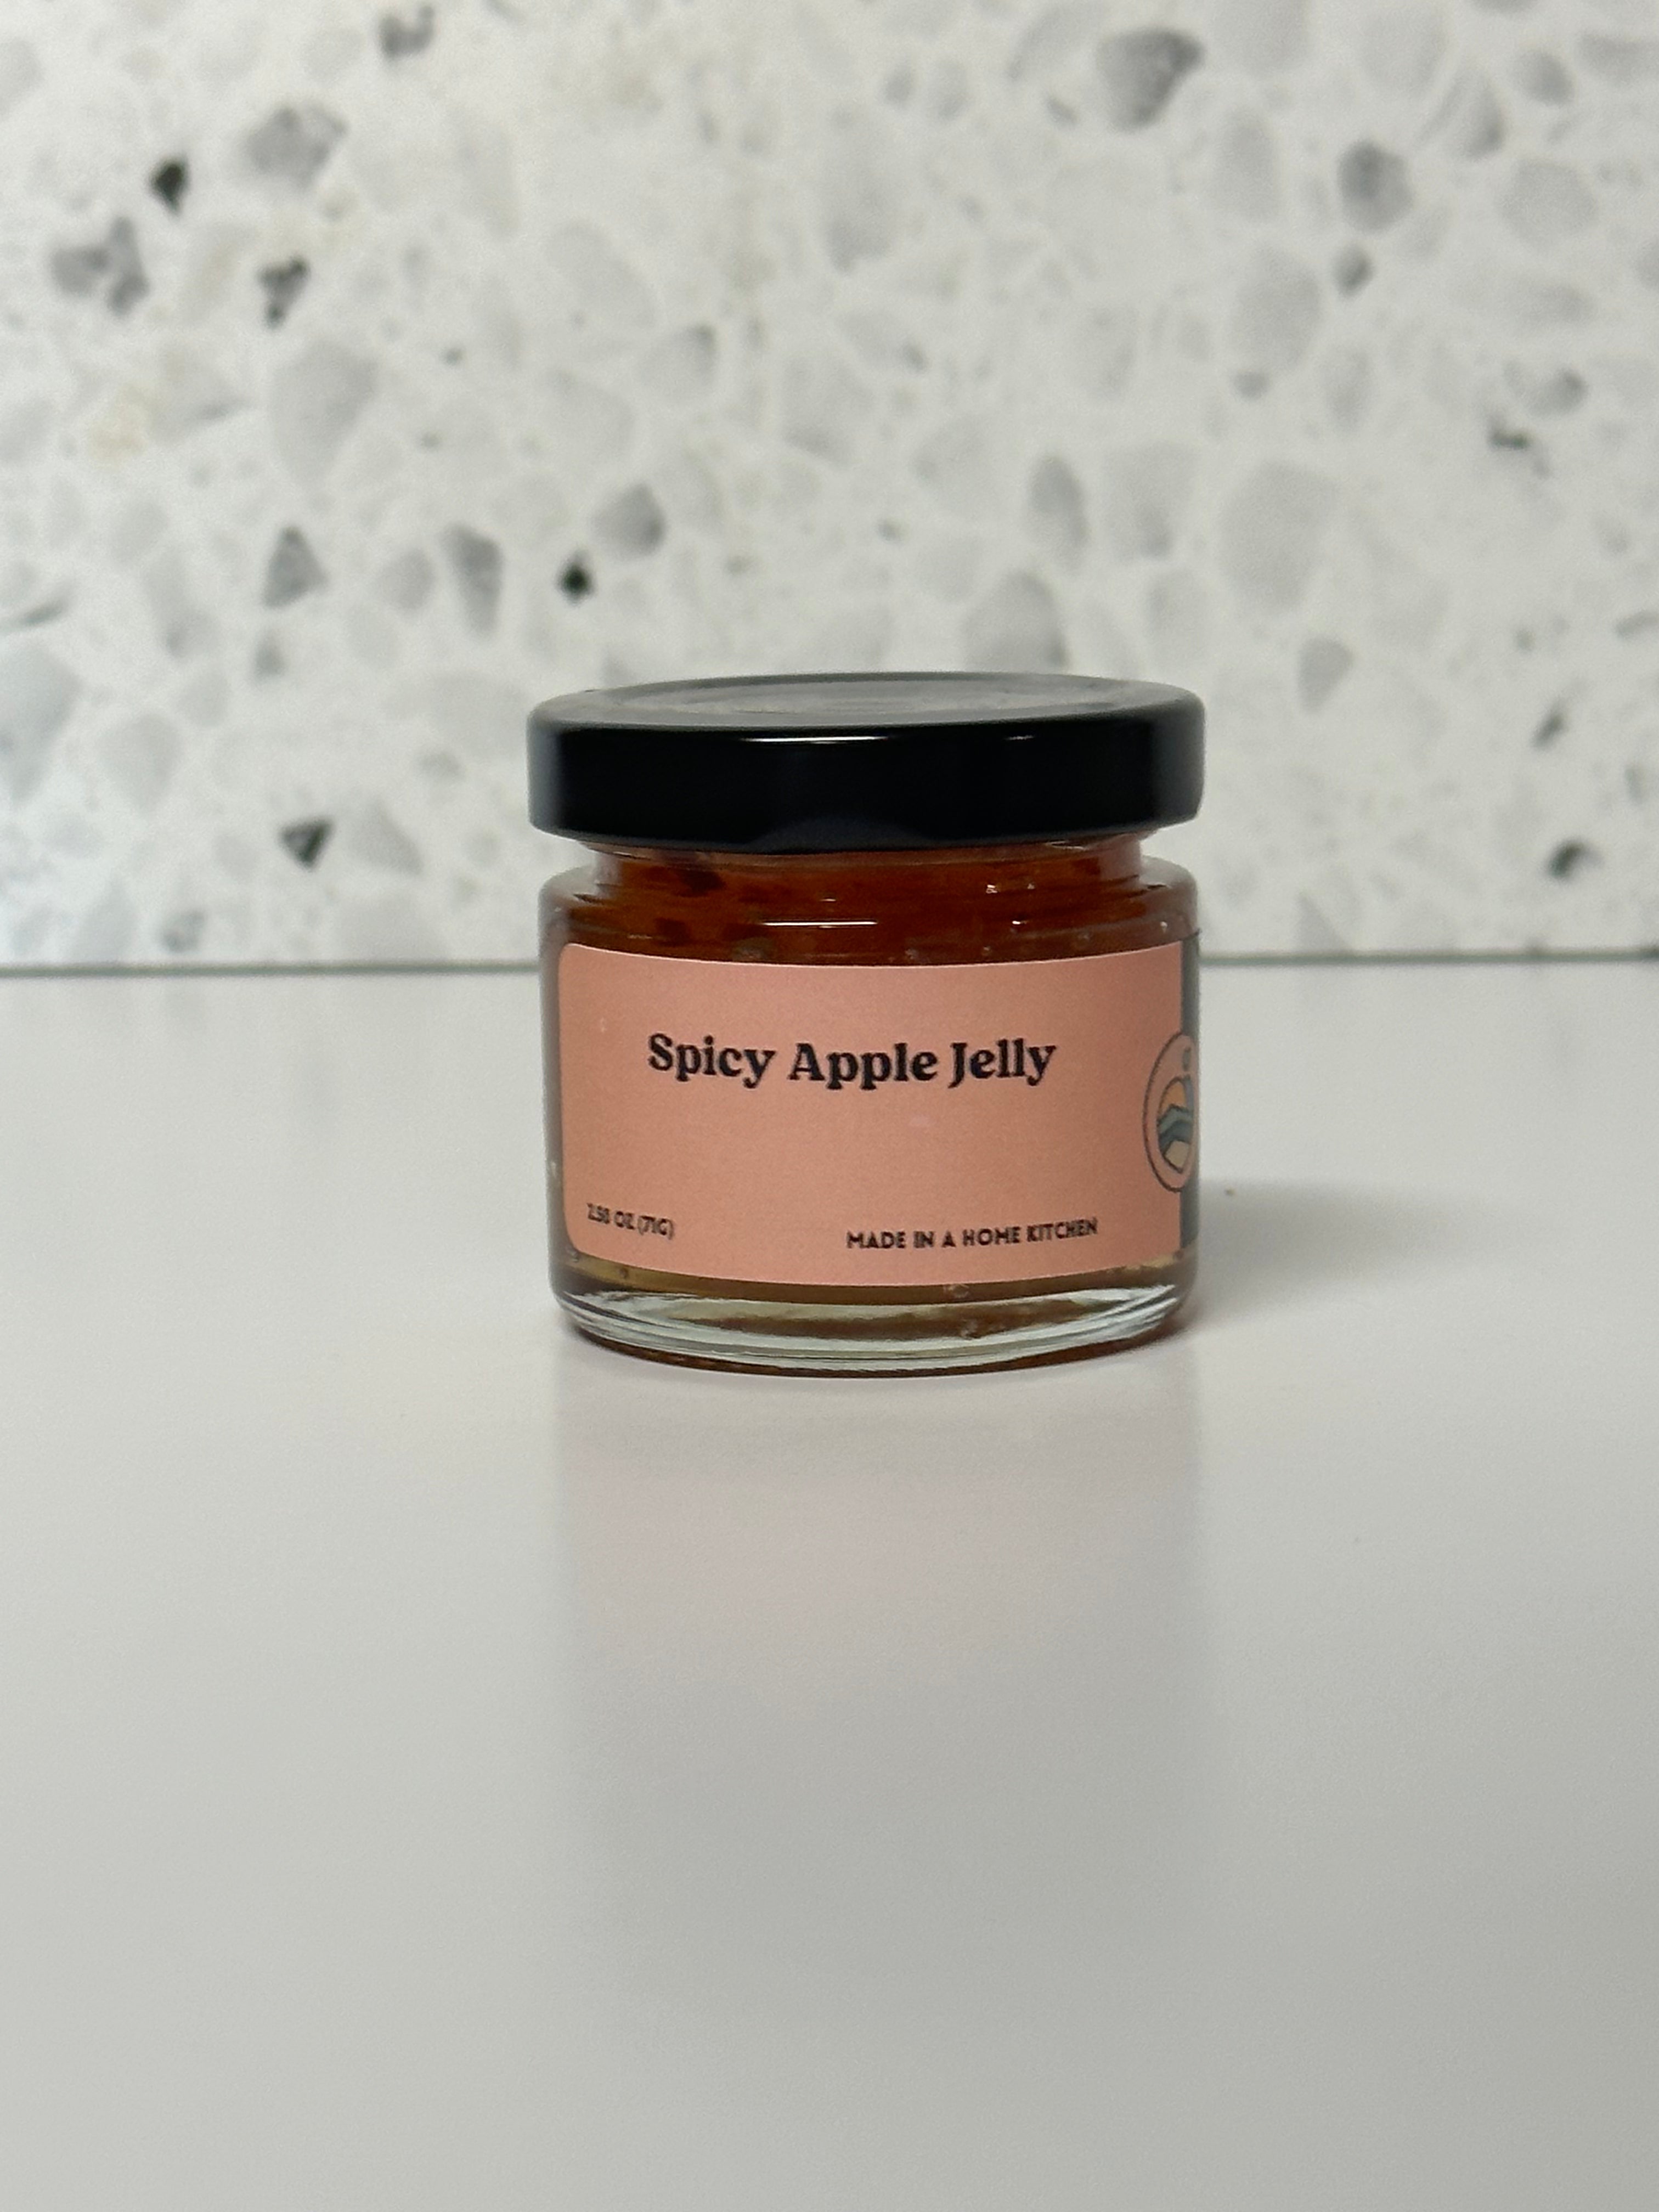 Spicy Apple Jelly